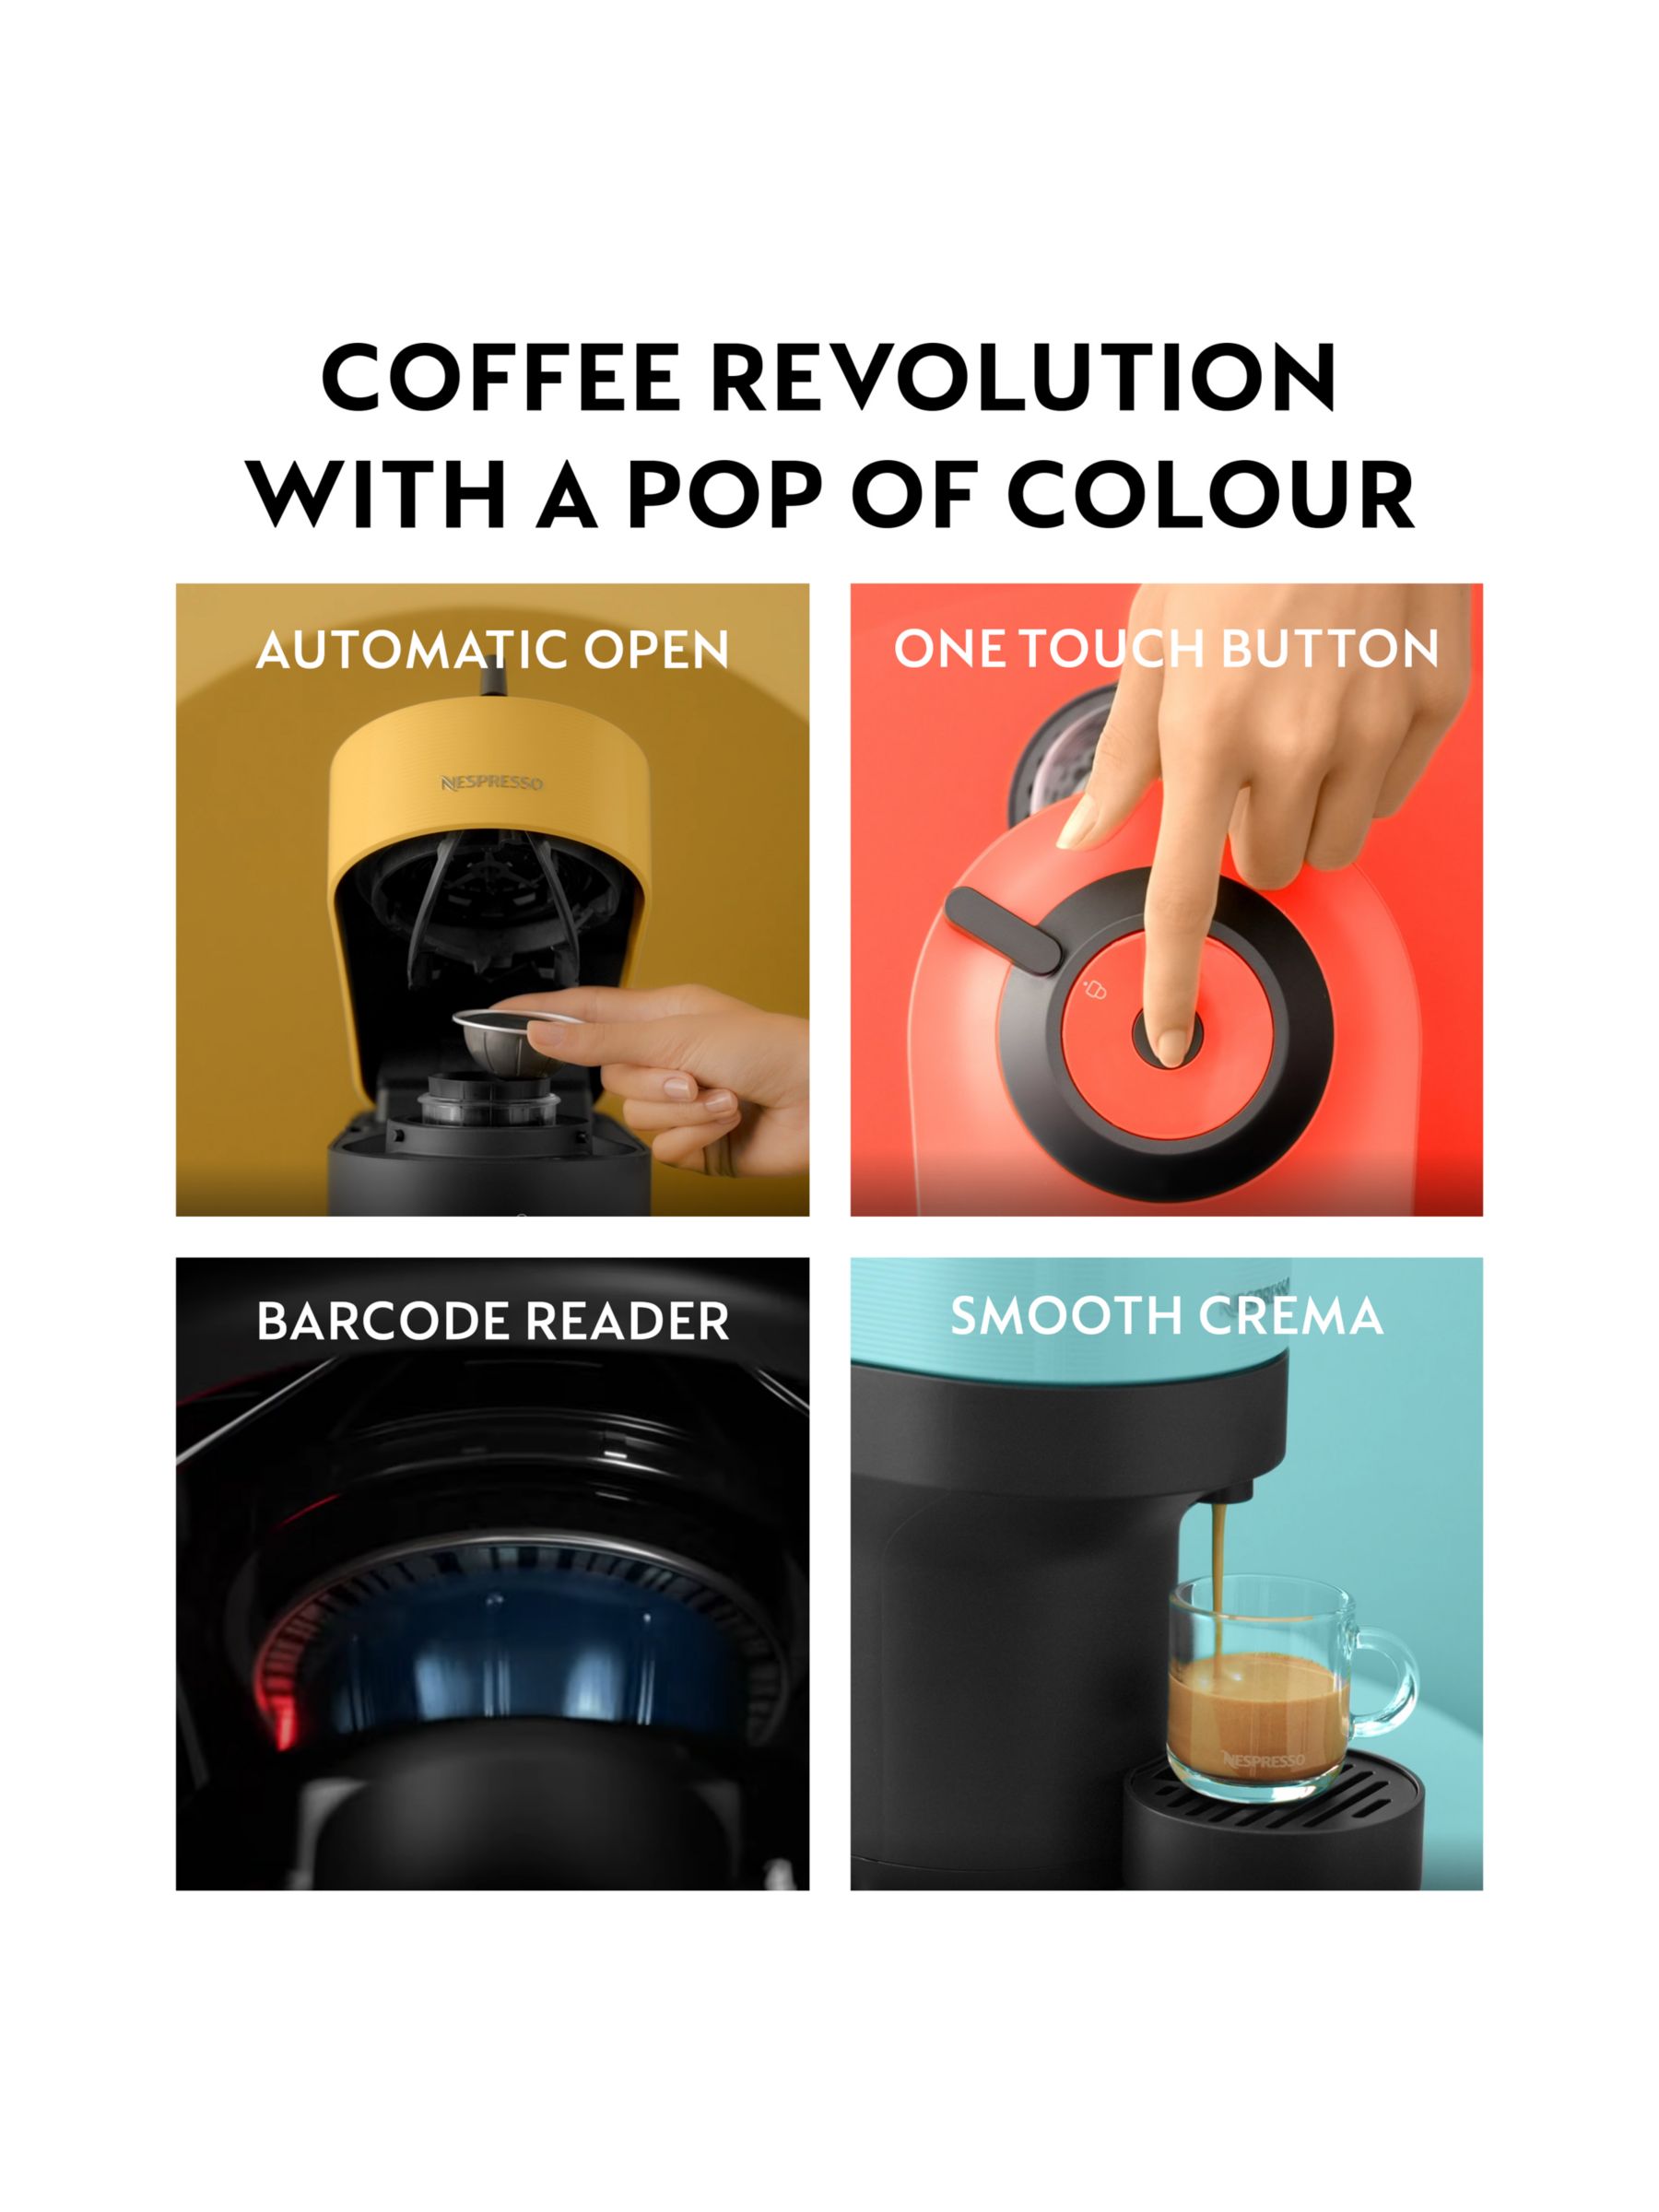 Nespresso Vertuo Pop Pros and cons with 70% OFF